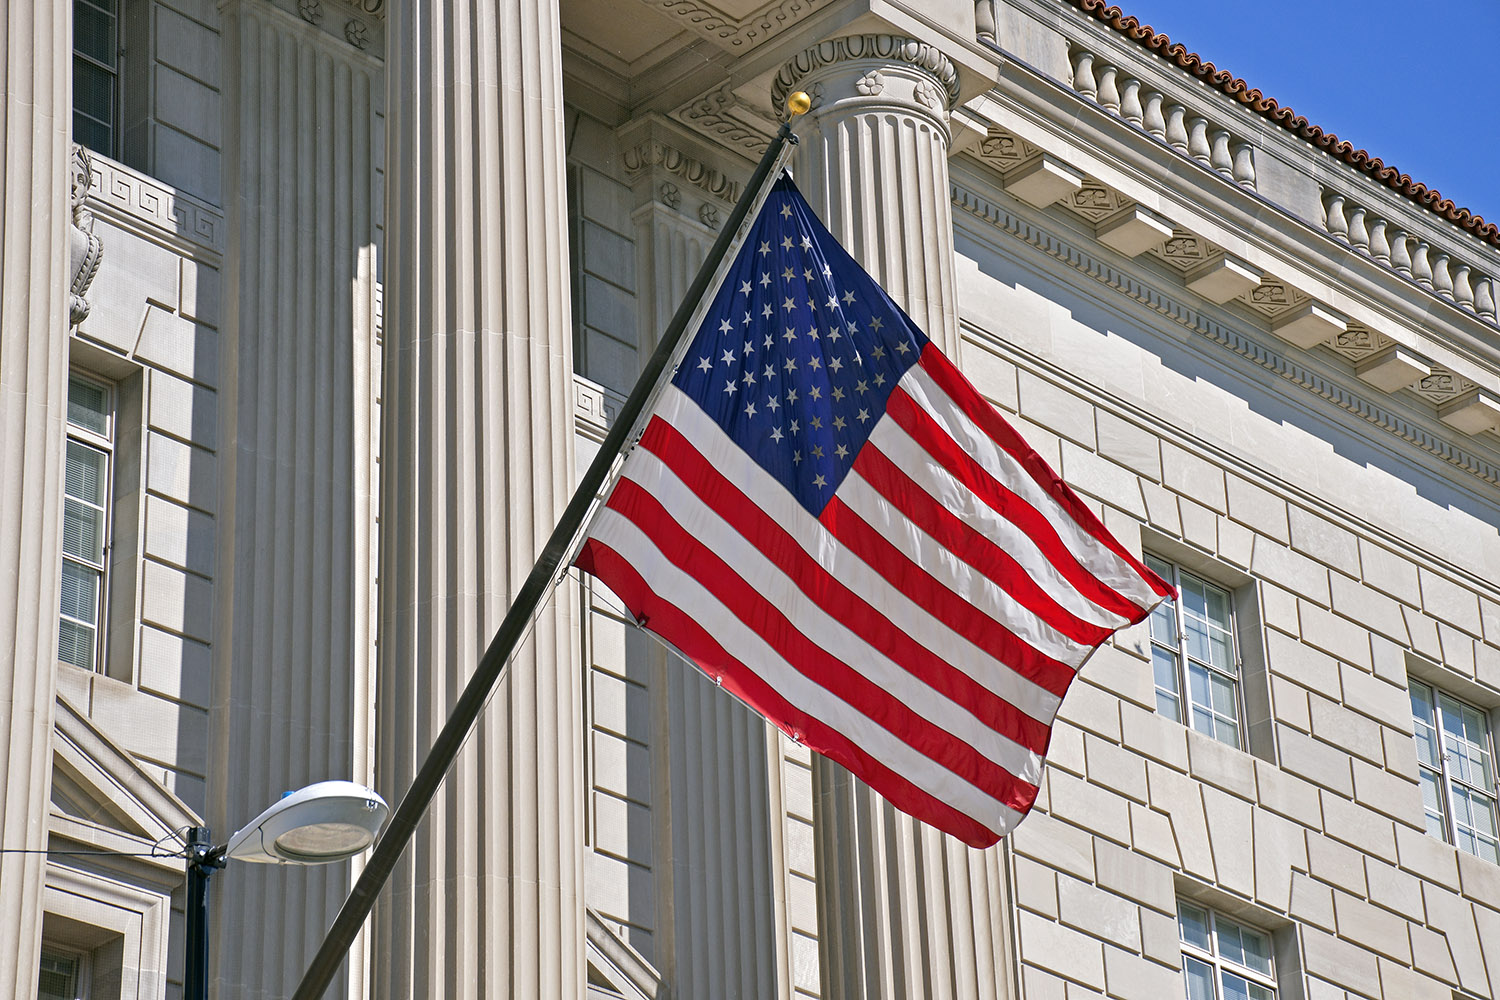 United_States_Department_of_Commerce_Detail_Federal_Government_America_ Business_Flag_Marble_Pillars_Stately_Washington_DC.jpg